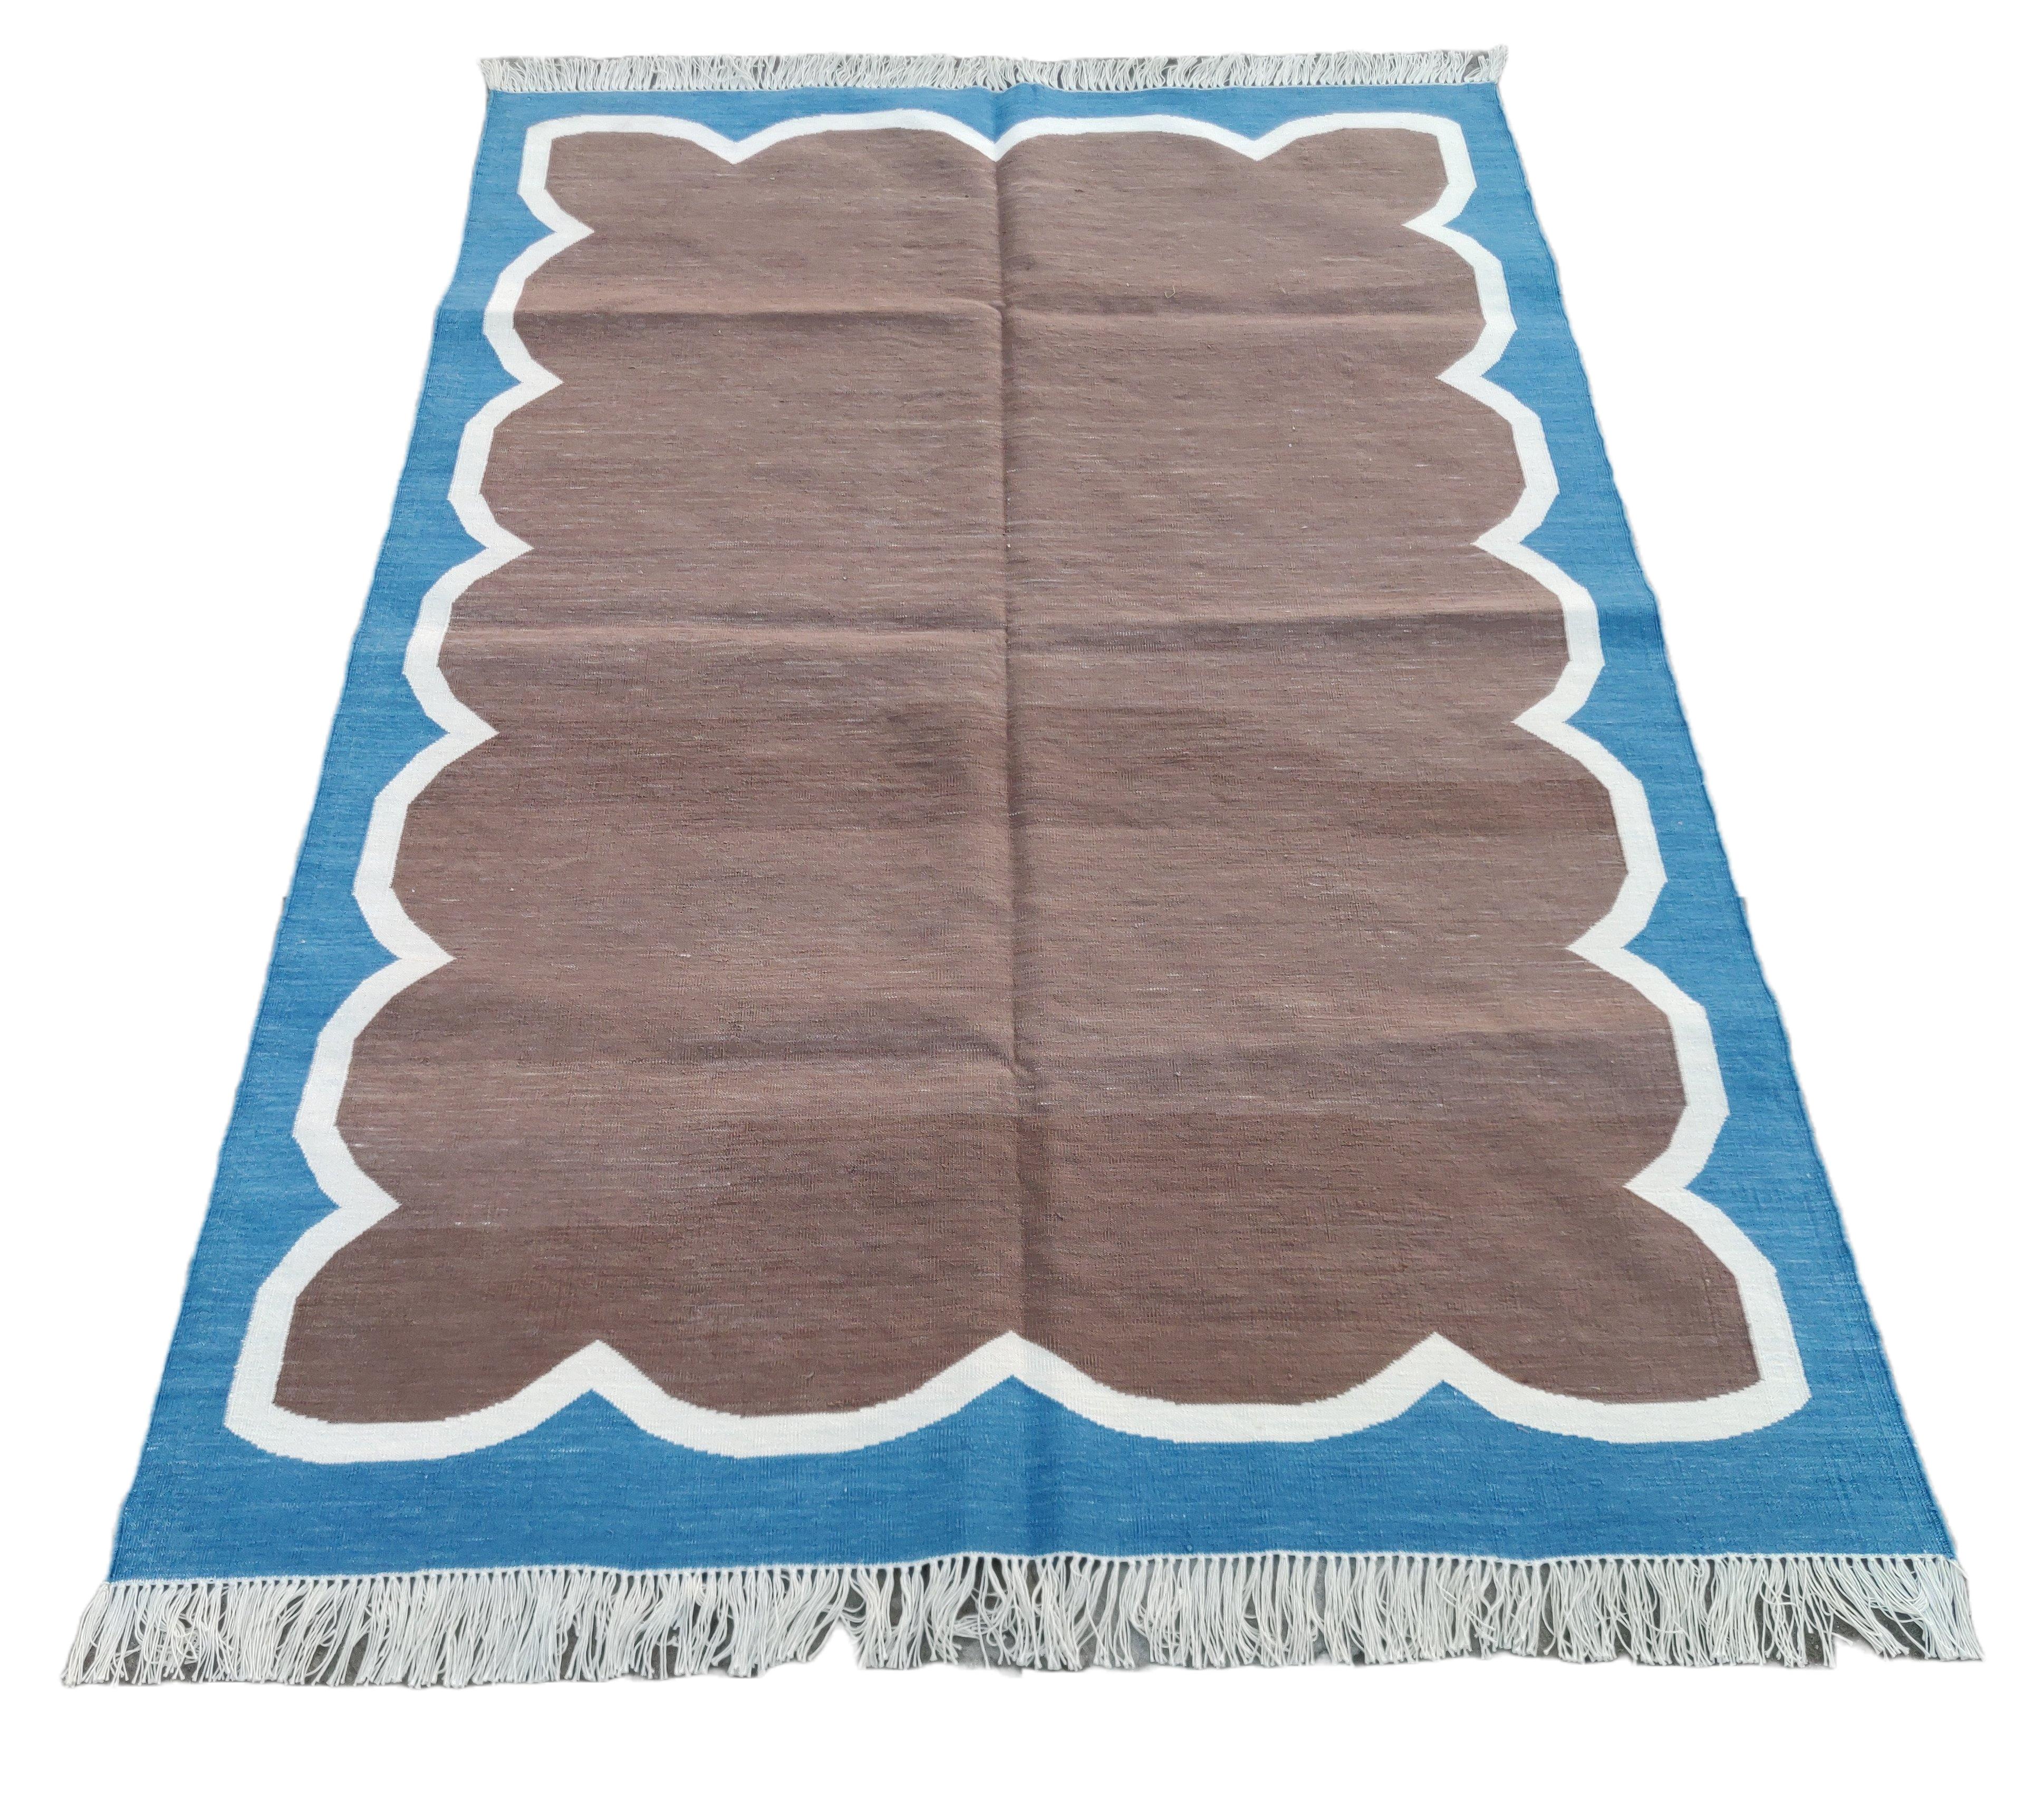 Handmade Cotton Area Flat Weave Rug, 4x6 Brown And Blue Scalloped Indian Dhurrie In New Condition For Sale In Jaipur, IN